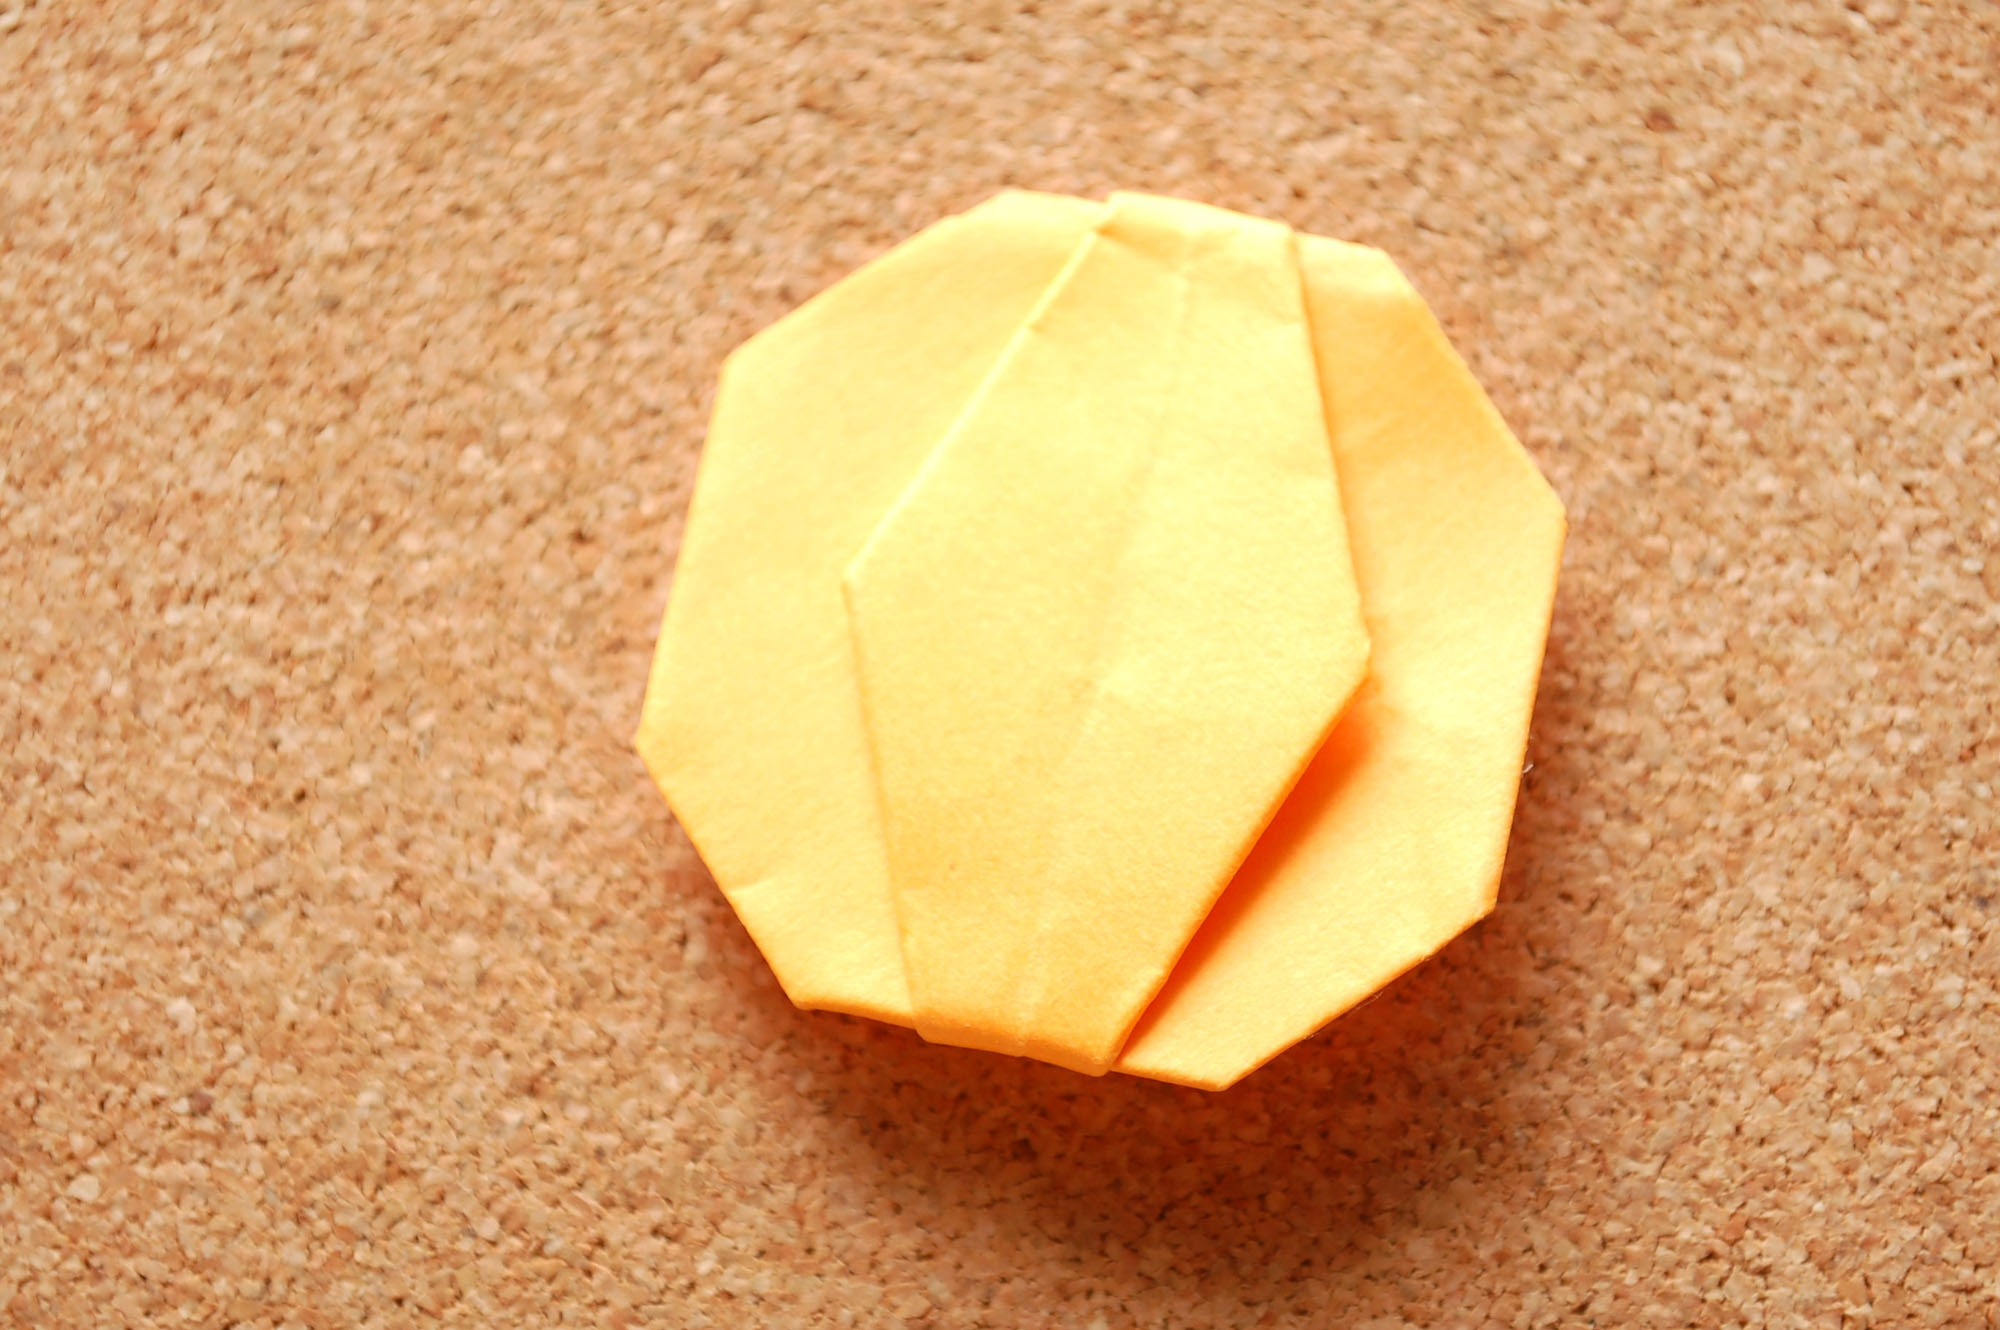 How To Make An Origami Pumpkin Amazing Of Origami Pumpkin How To Make An Steps With Pictures